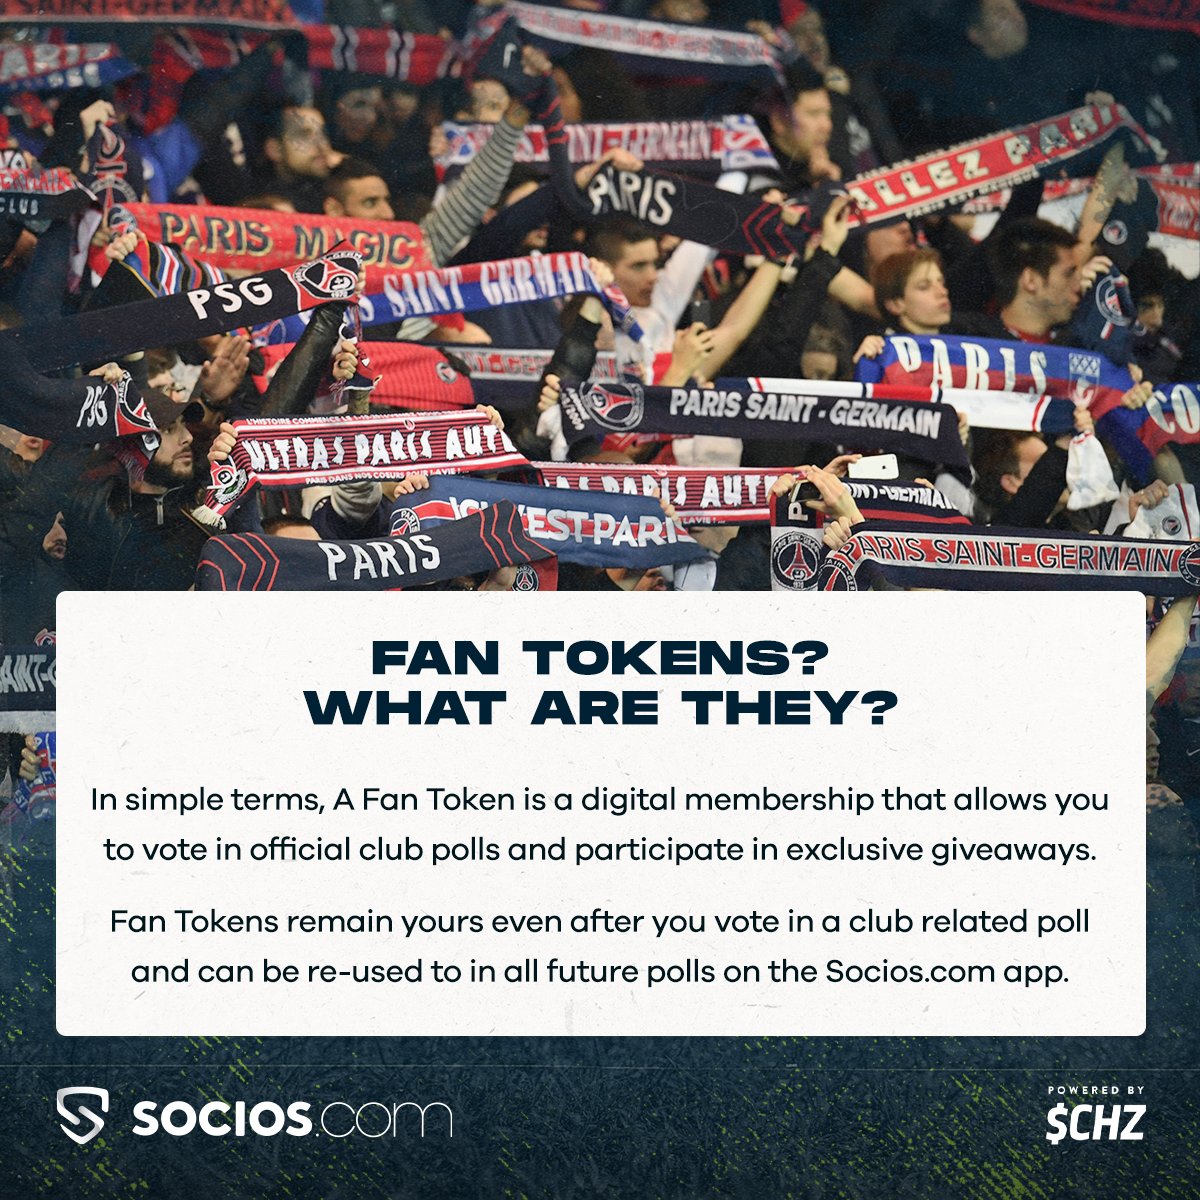 Fan Tokens are the future of sports and entertainment, but do you know what they are? #365DaysOfSocios | 2/5